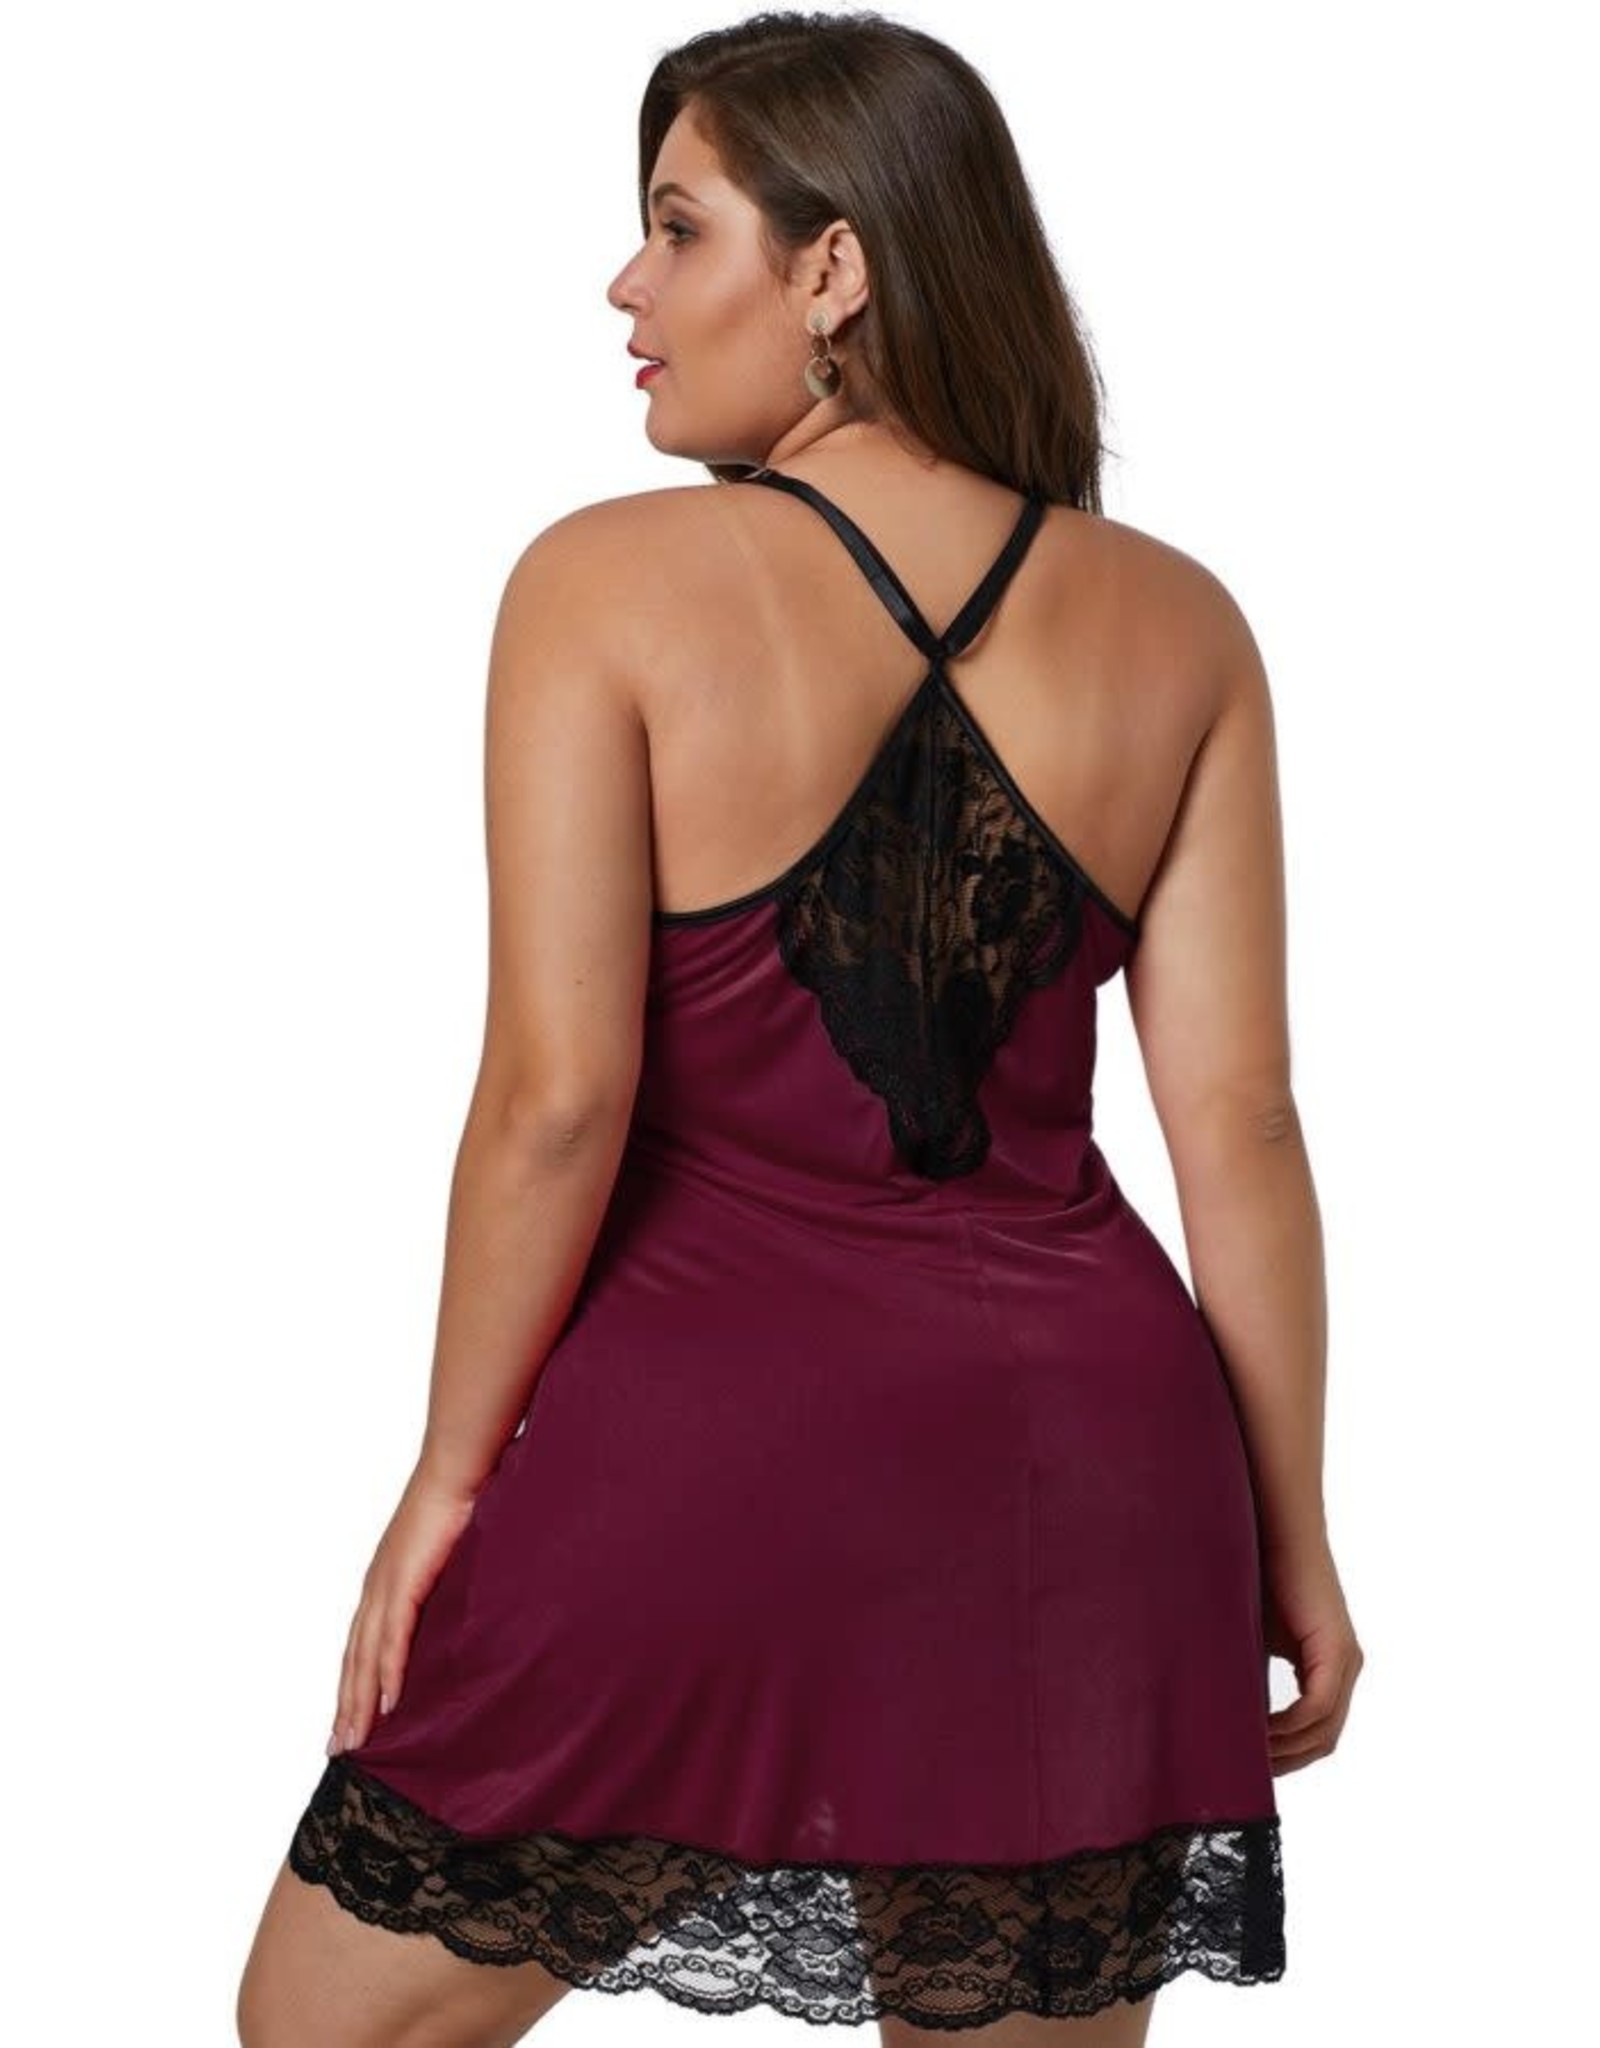 WINE RED VENECIA CHEMISE WITH LACE TRIM - (US 22-24)3X